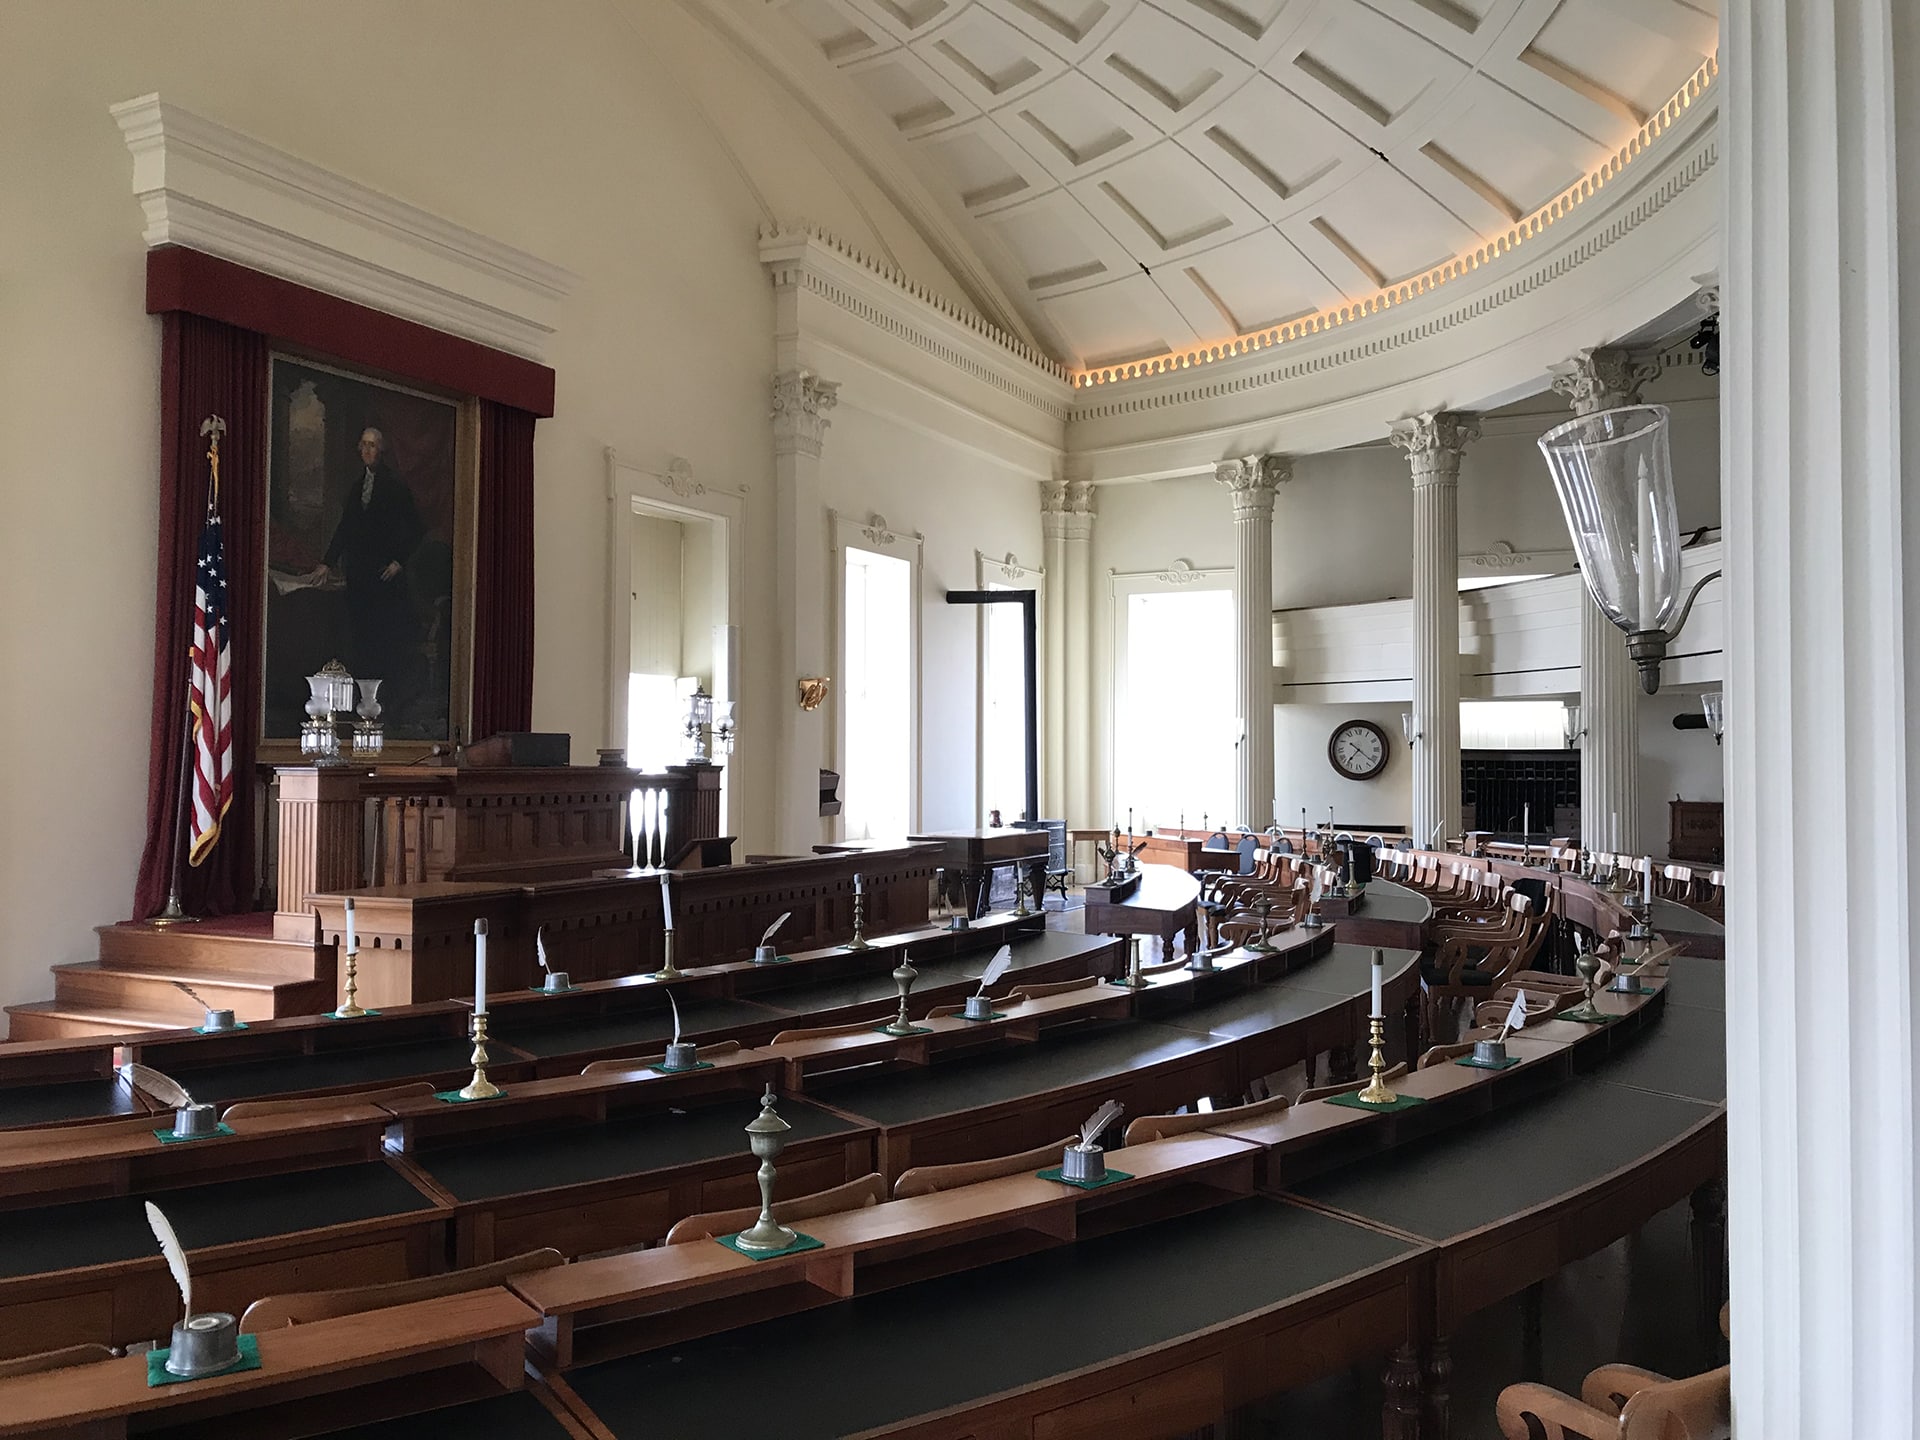 Interior of Old State MO Capitol Building Courtroom Renovated by Trivers Architectural Firm in St. Louis